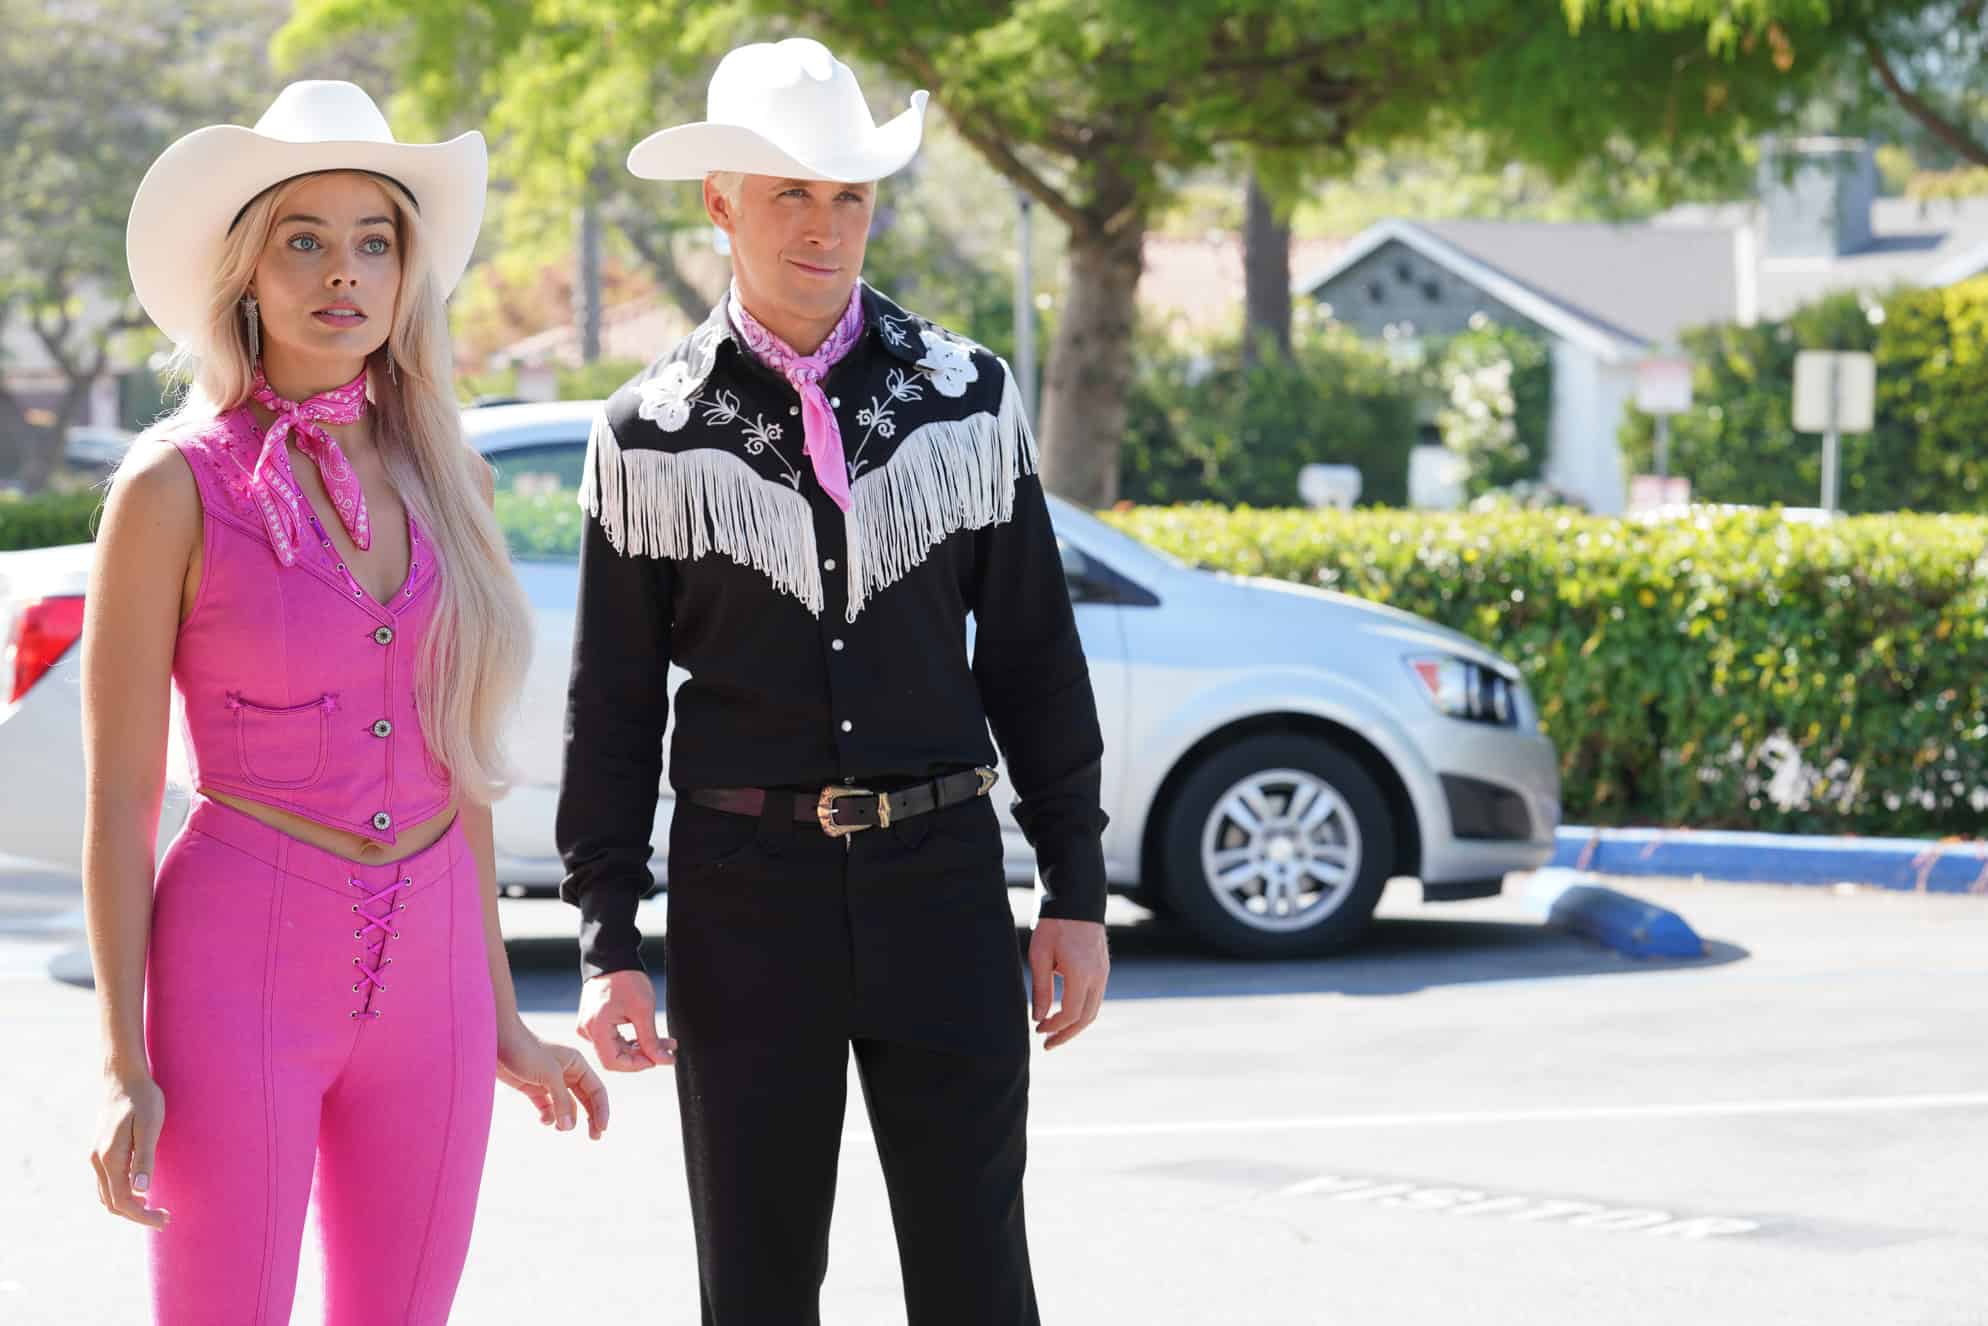 Barbie and Ken outside in cowboy outfits in this image from HeyDay Films.